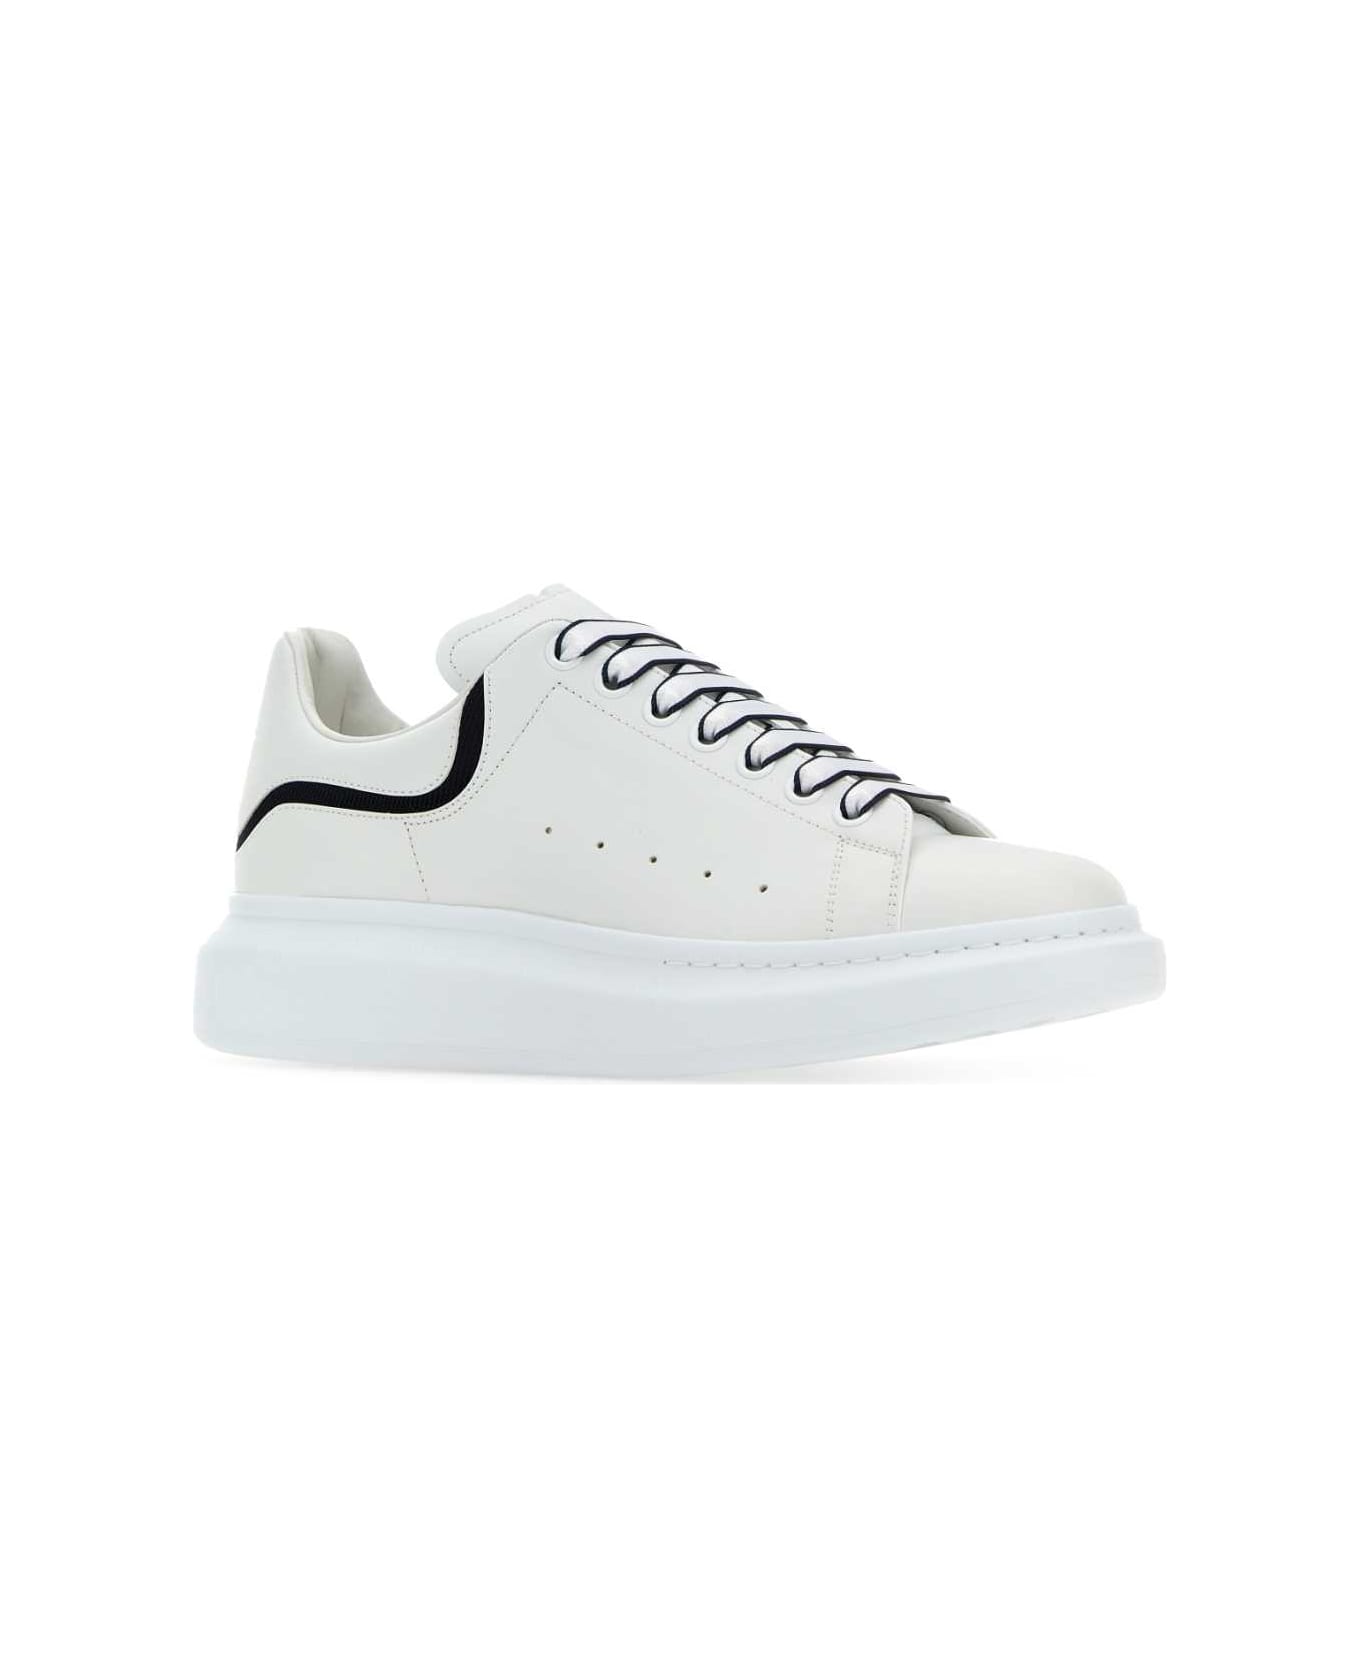 Alexander McQueen White Leather Sneakers With White Leather Heel - 9095 スニーカー